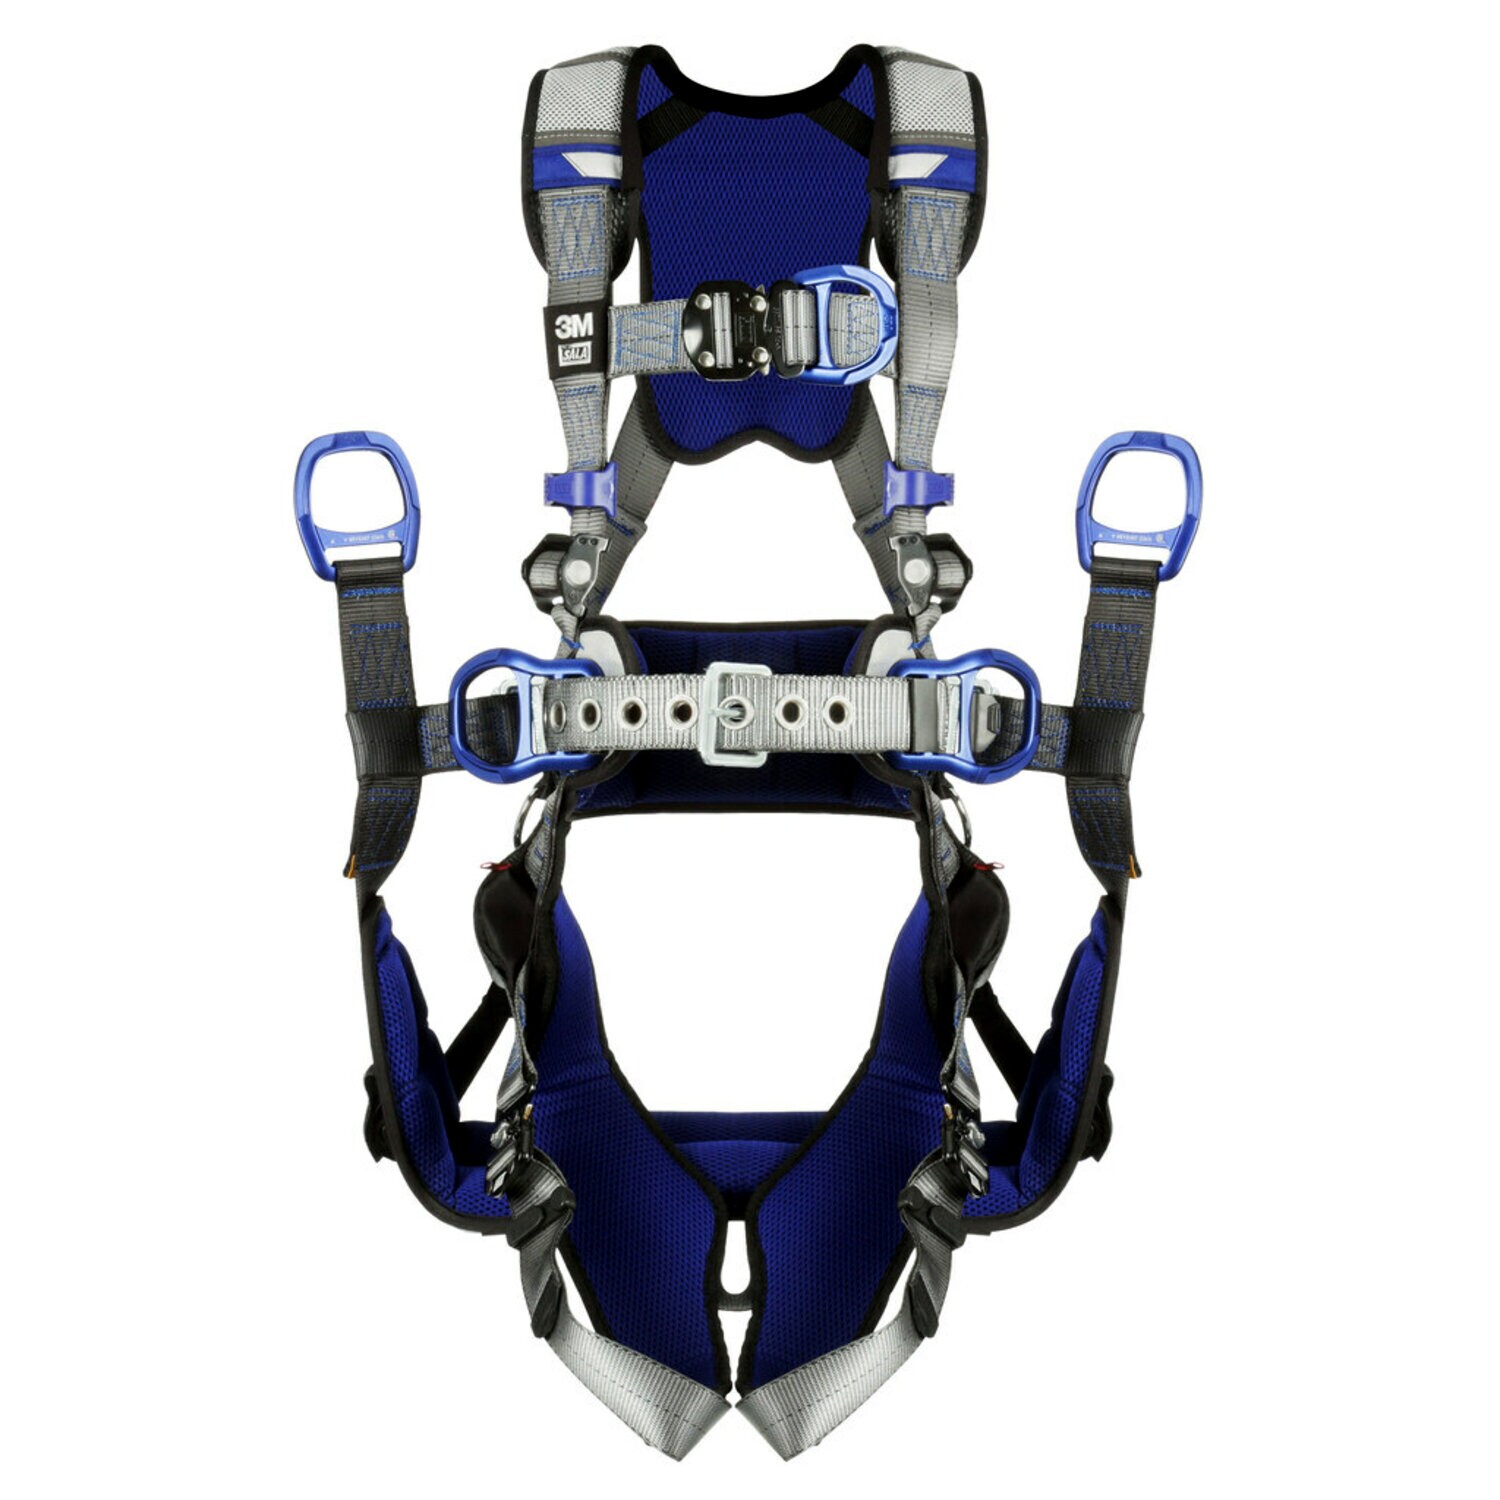 7012817886 - 3M DBI-SALA ExoFit X200 Comfort Tower Climbing/Positioning/Suspension Safety Harness 1402139, 2X